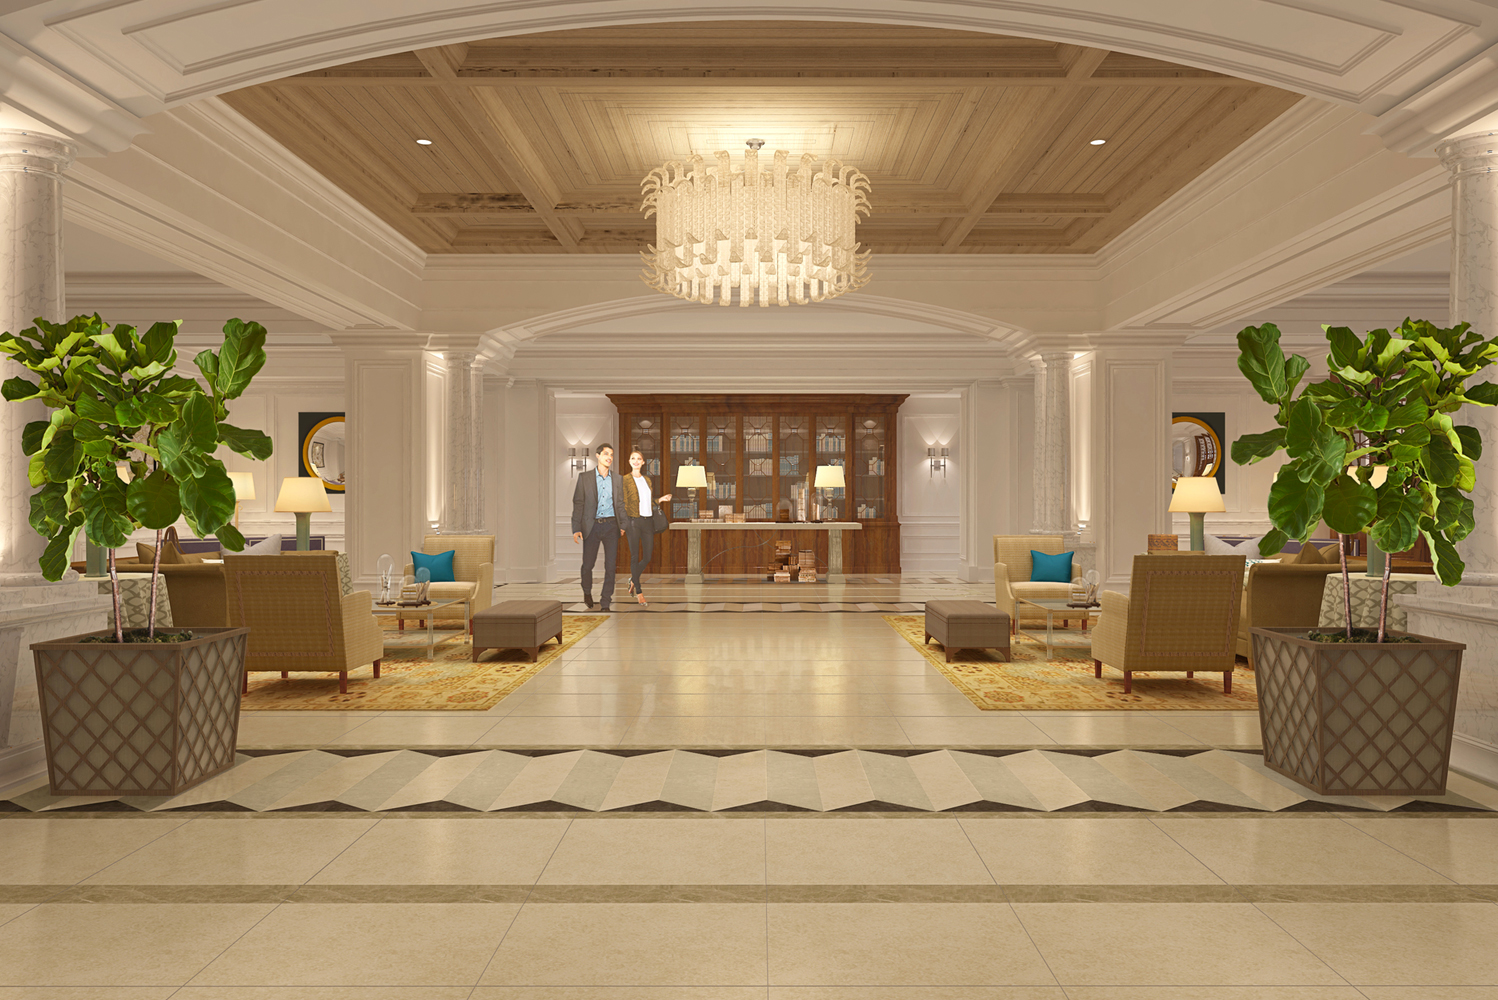 Hotel Bennett is scheduled to open in Charleston SC in January 2019 